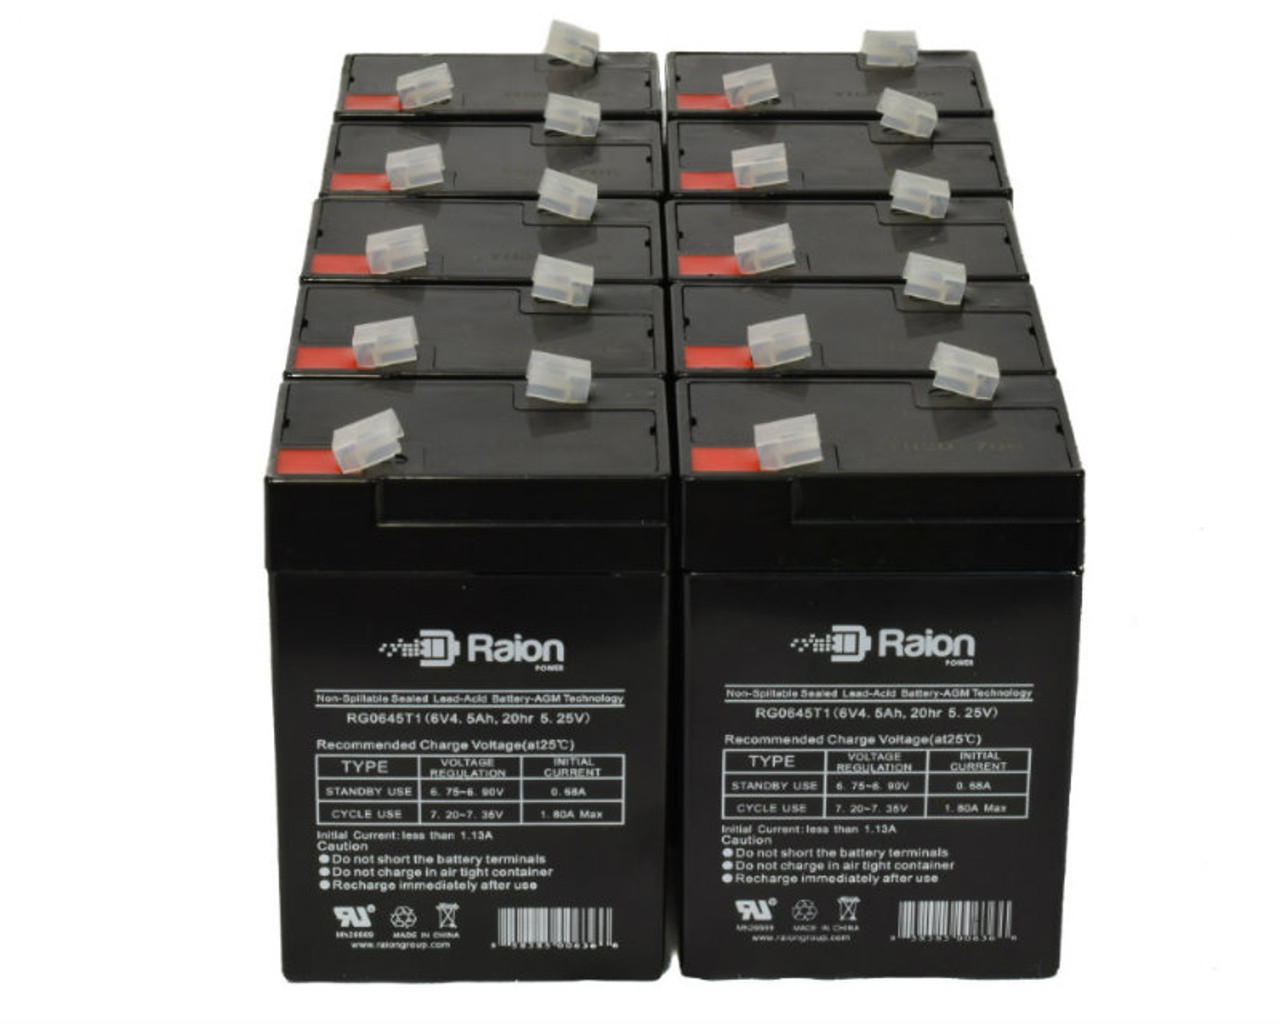 Raion Power 6 Volt 4.5Ah RG0645T1 Replacement Battery for Blossom BT4-6S - 10 Pack